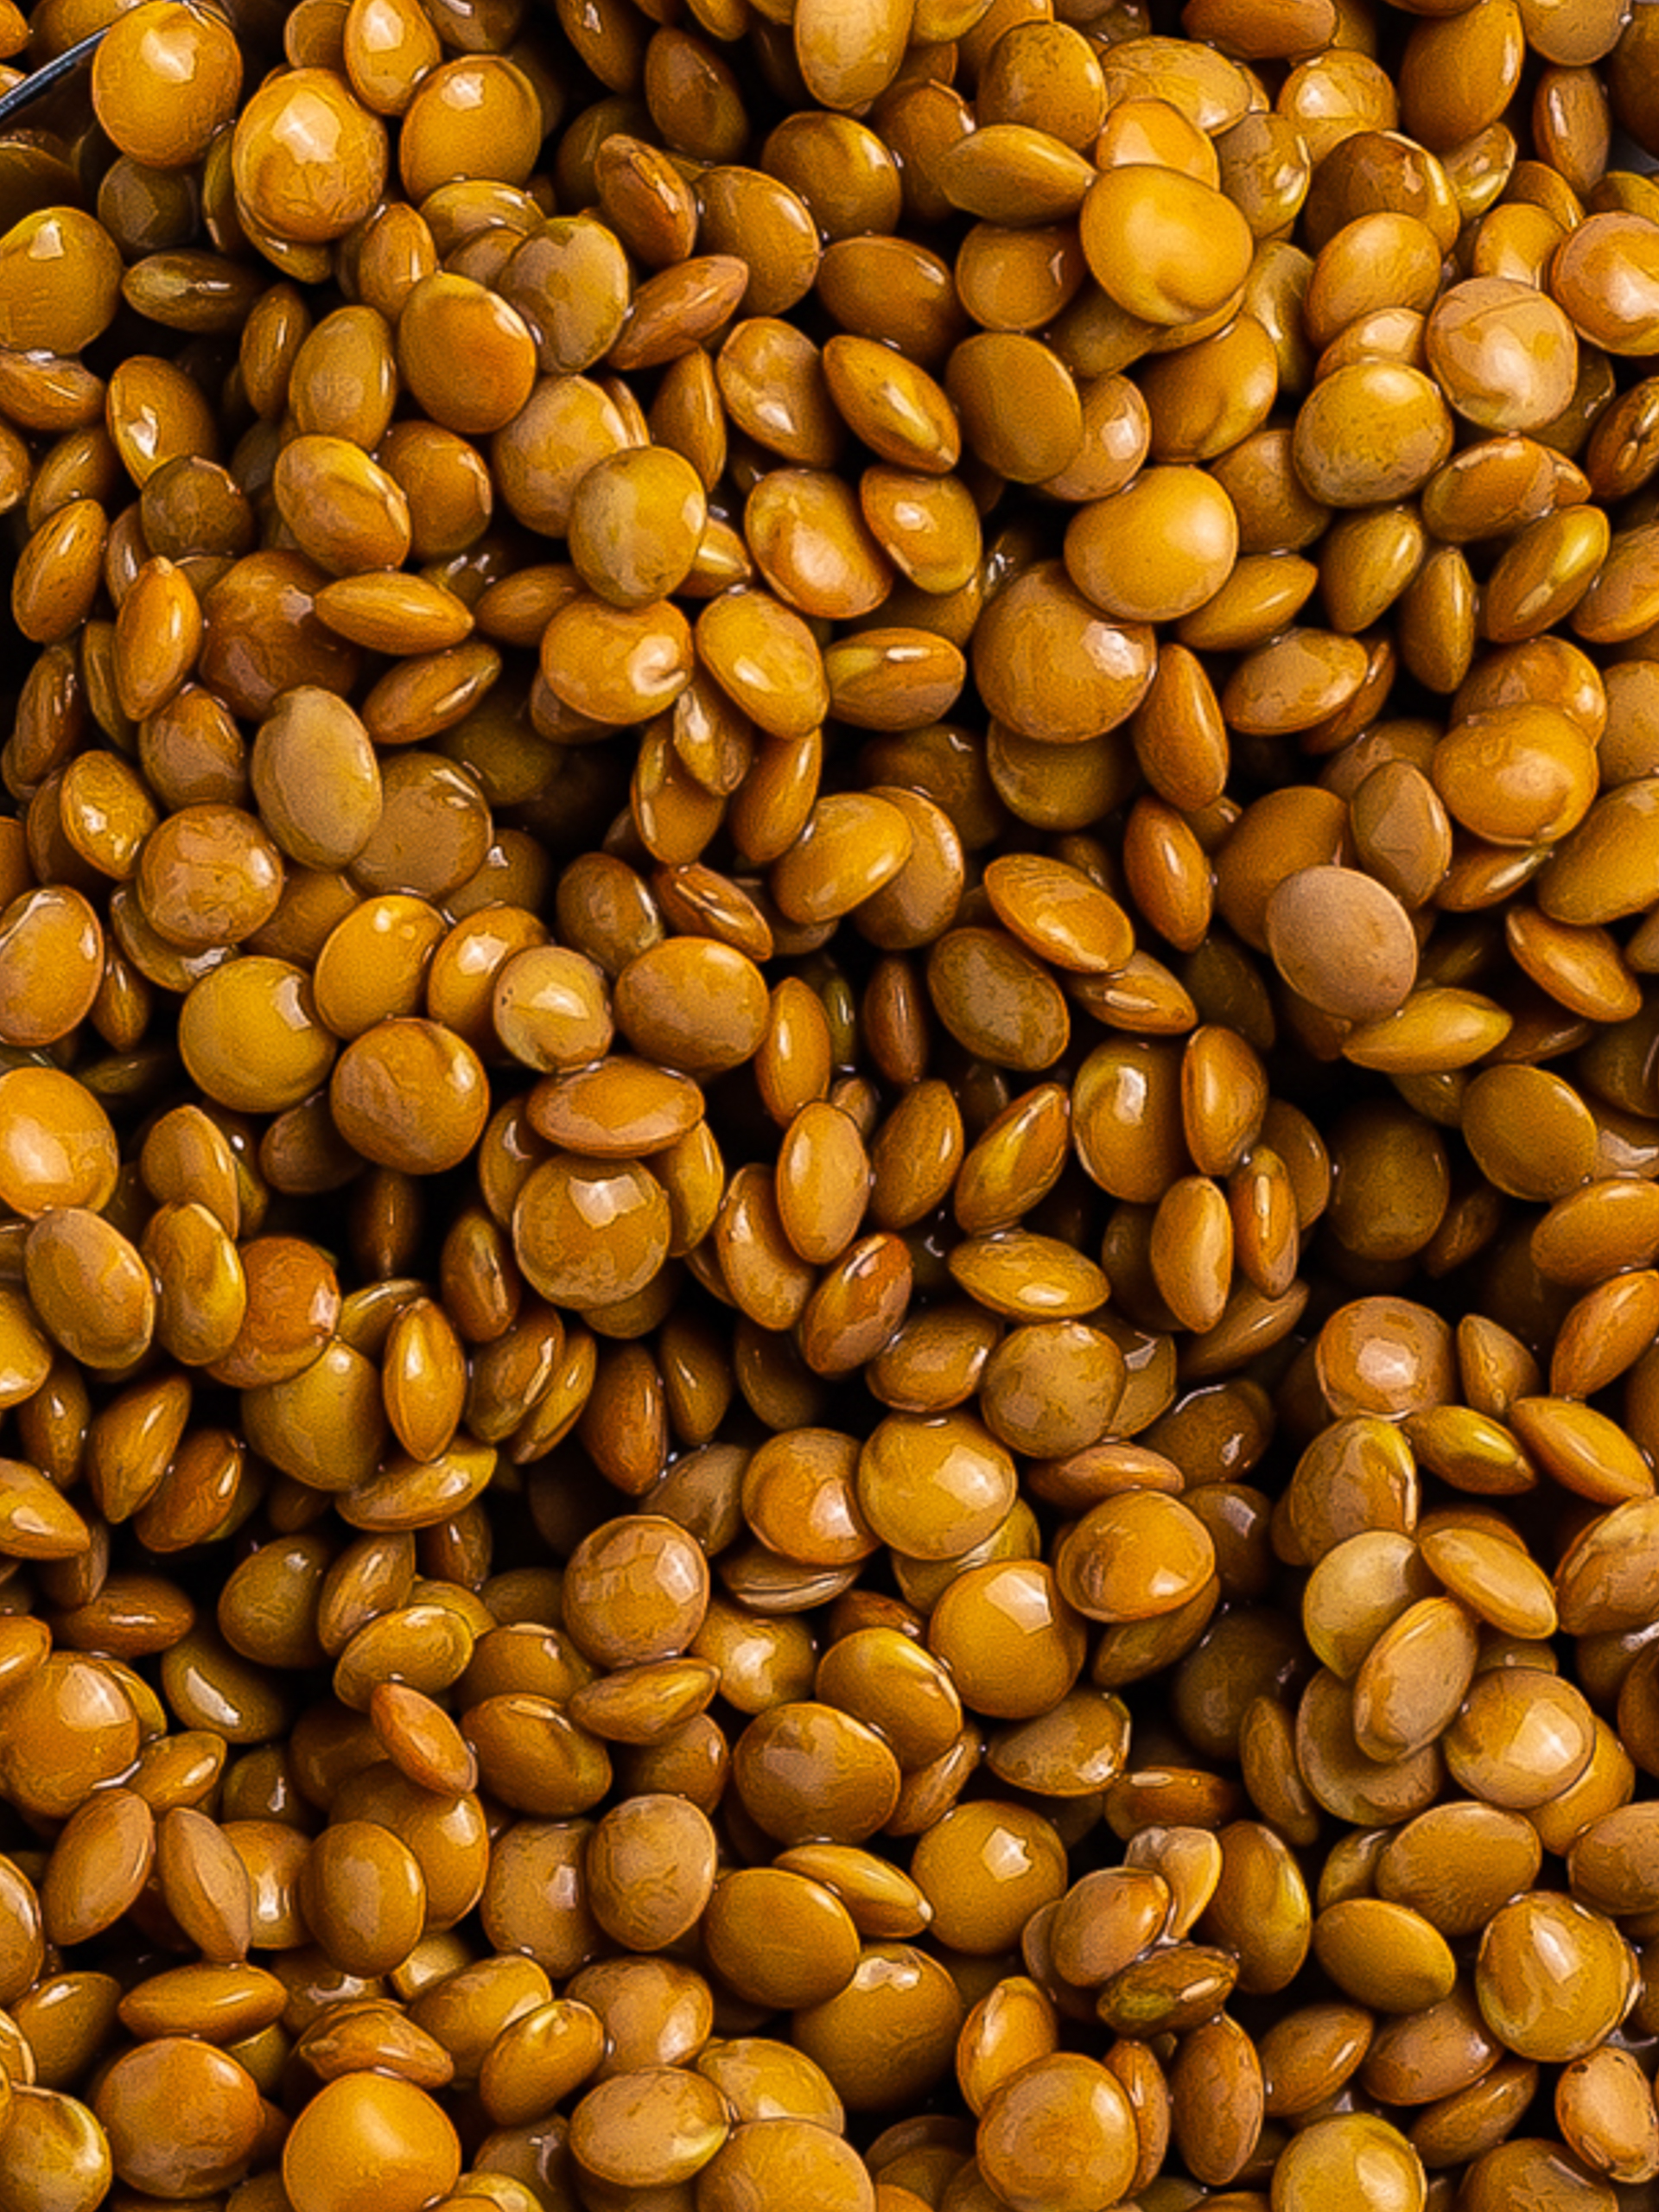 8 Ways to Eat More Lentils For a Protein Boost